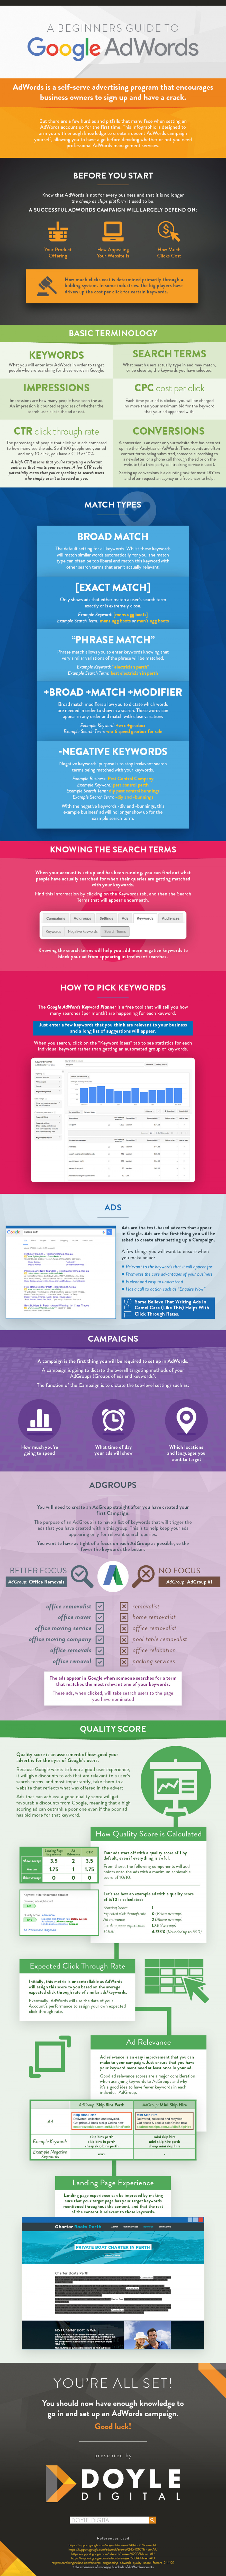 Beginners Guide to AdWords Infographic